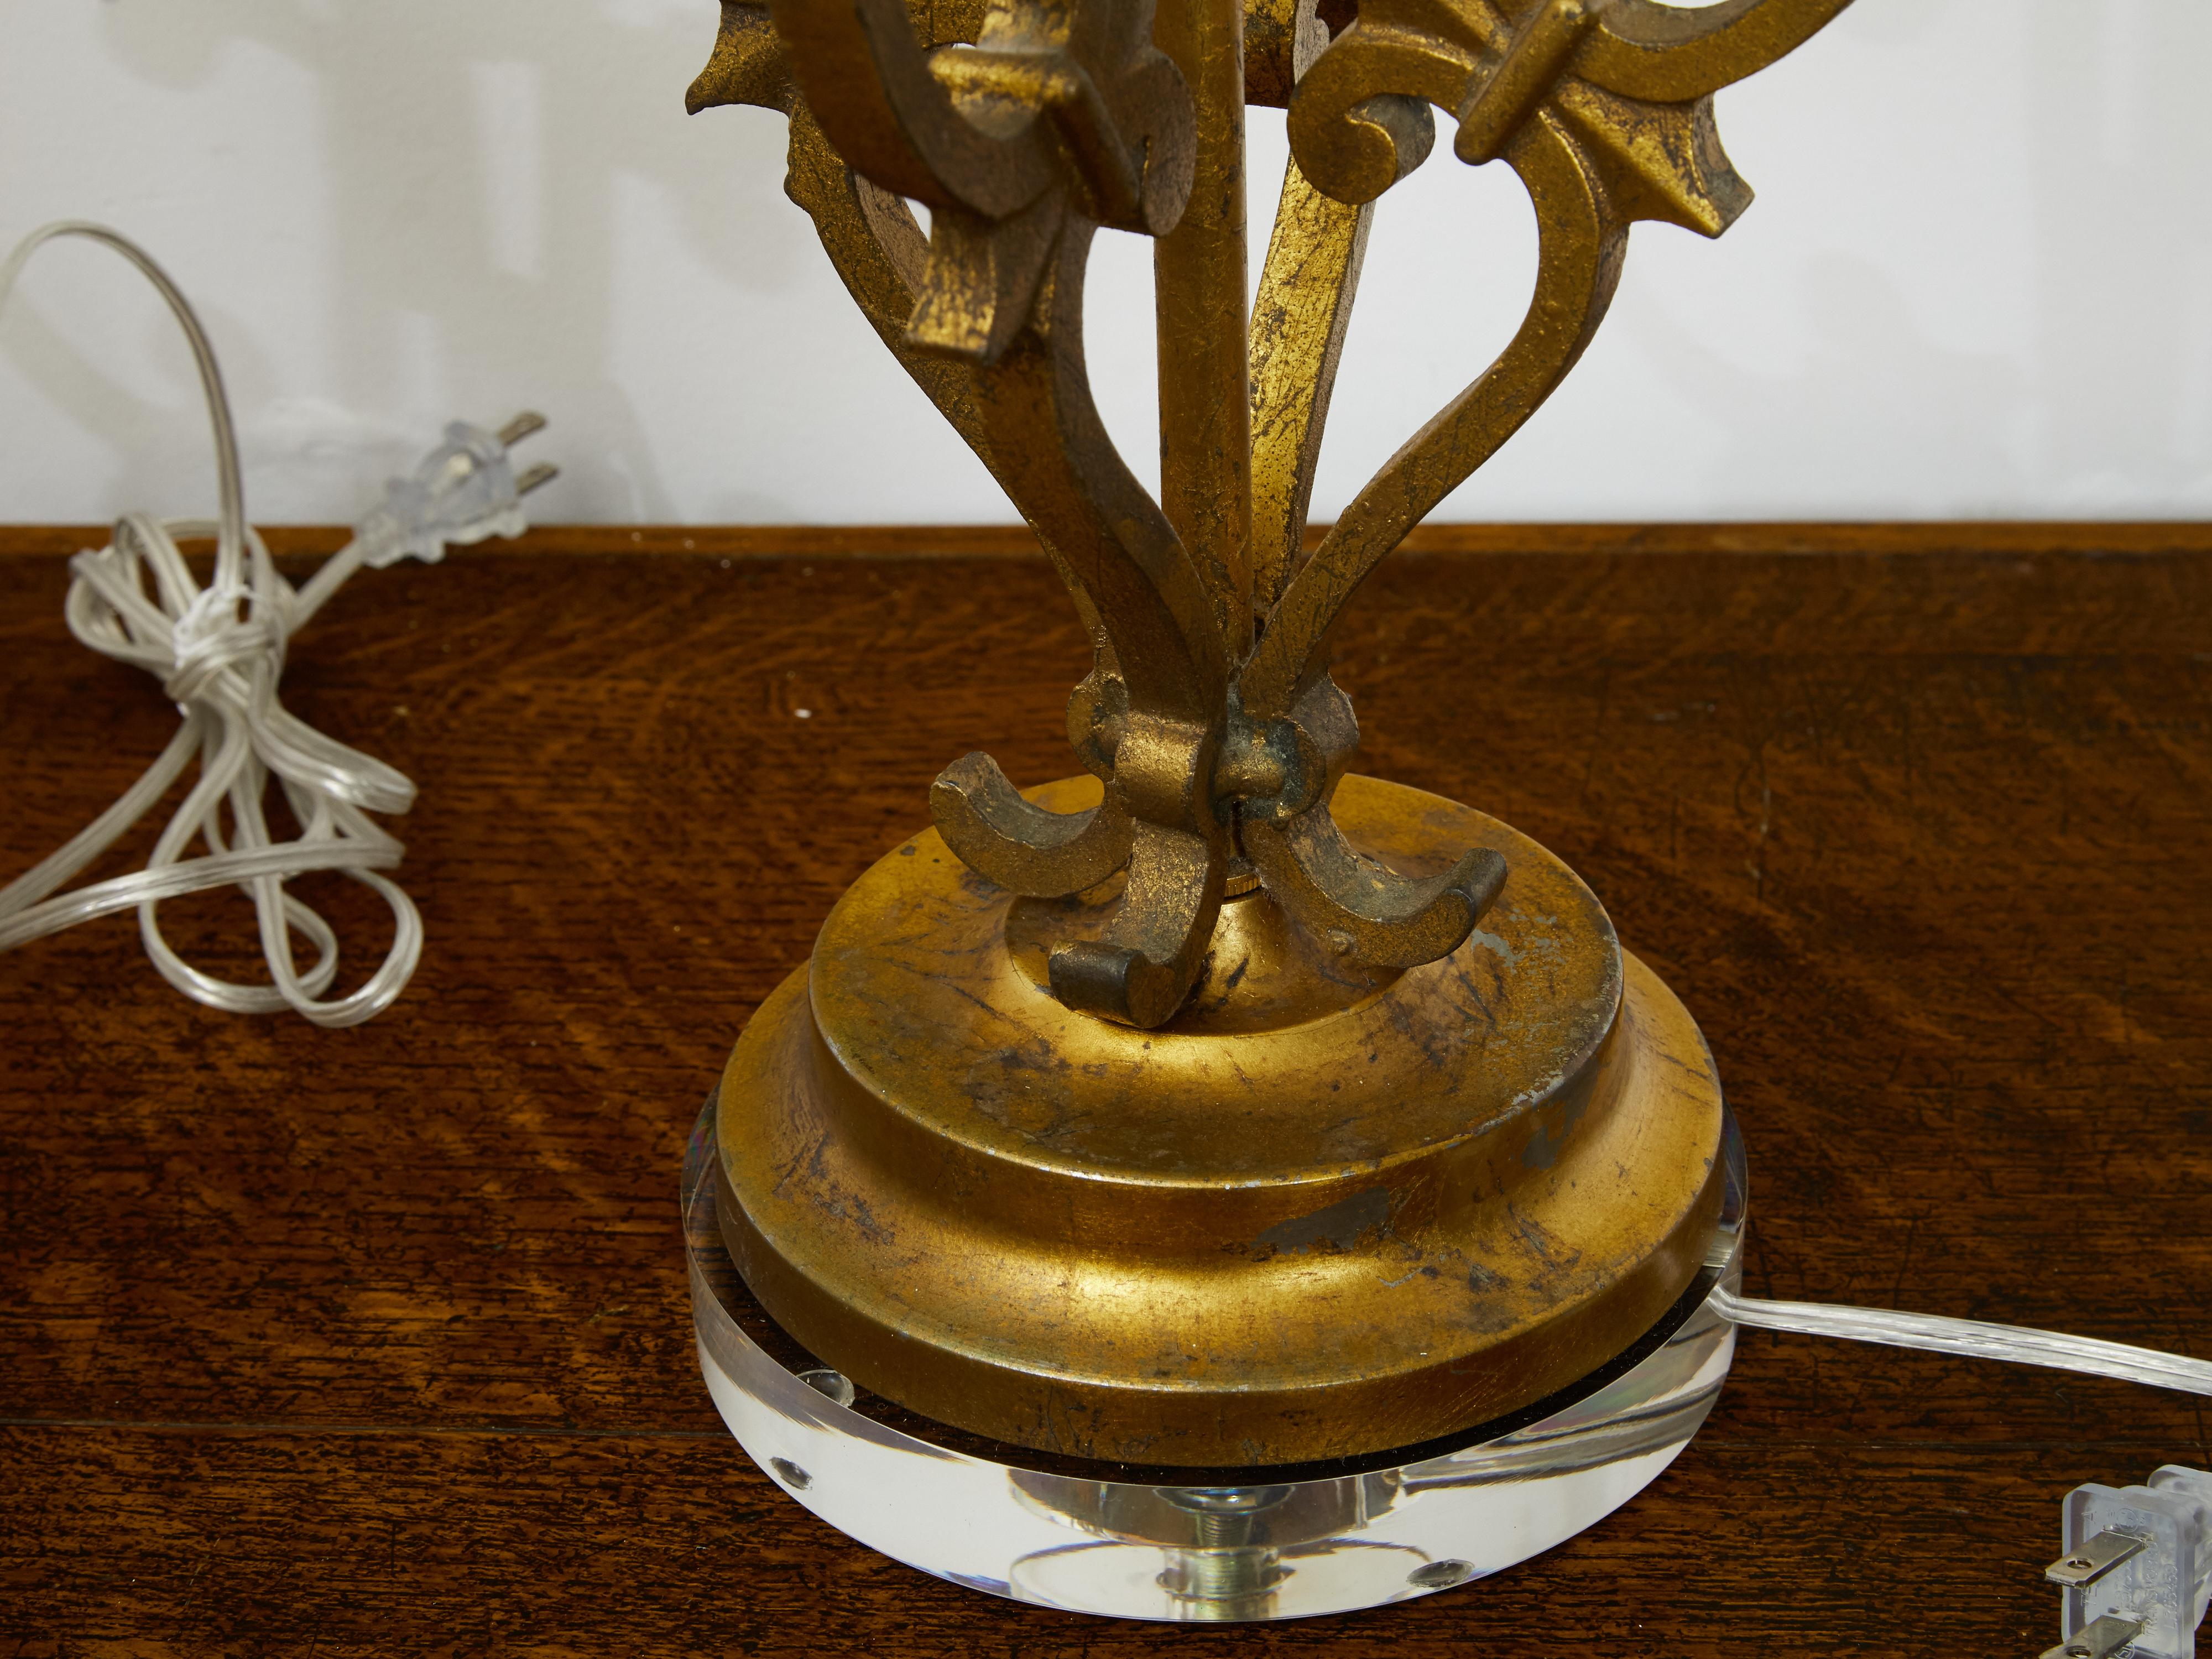 Pair of French Midcentury Gilt Metal Table Lamps with Scrolls and Fleur de Lys For Sale 3